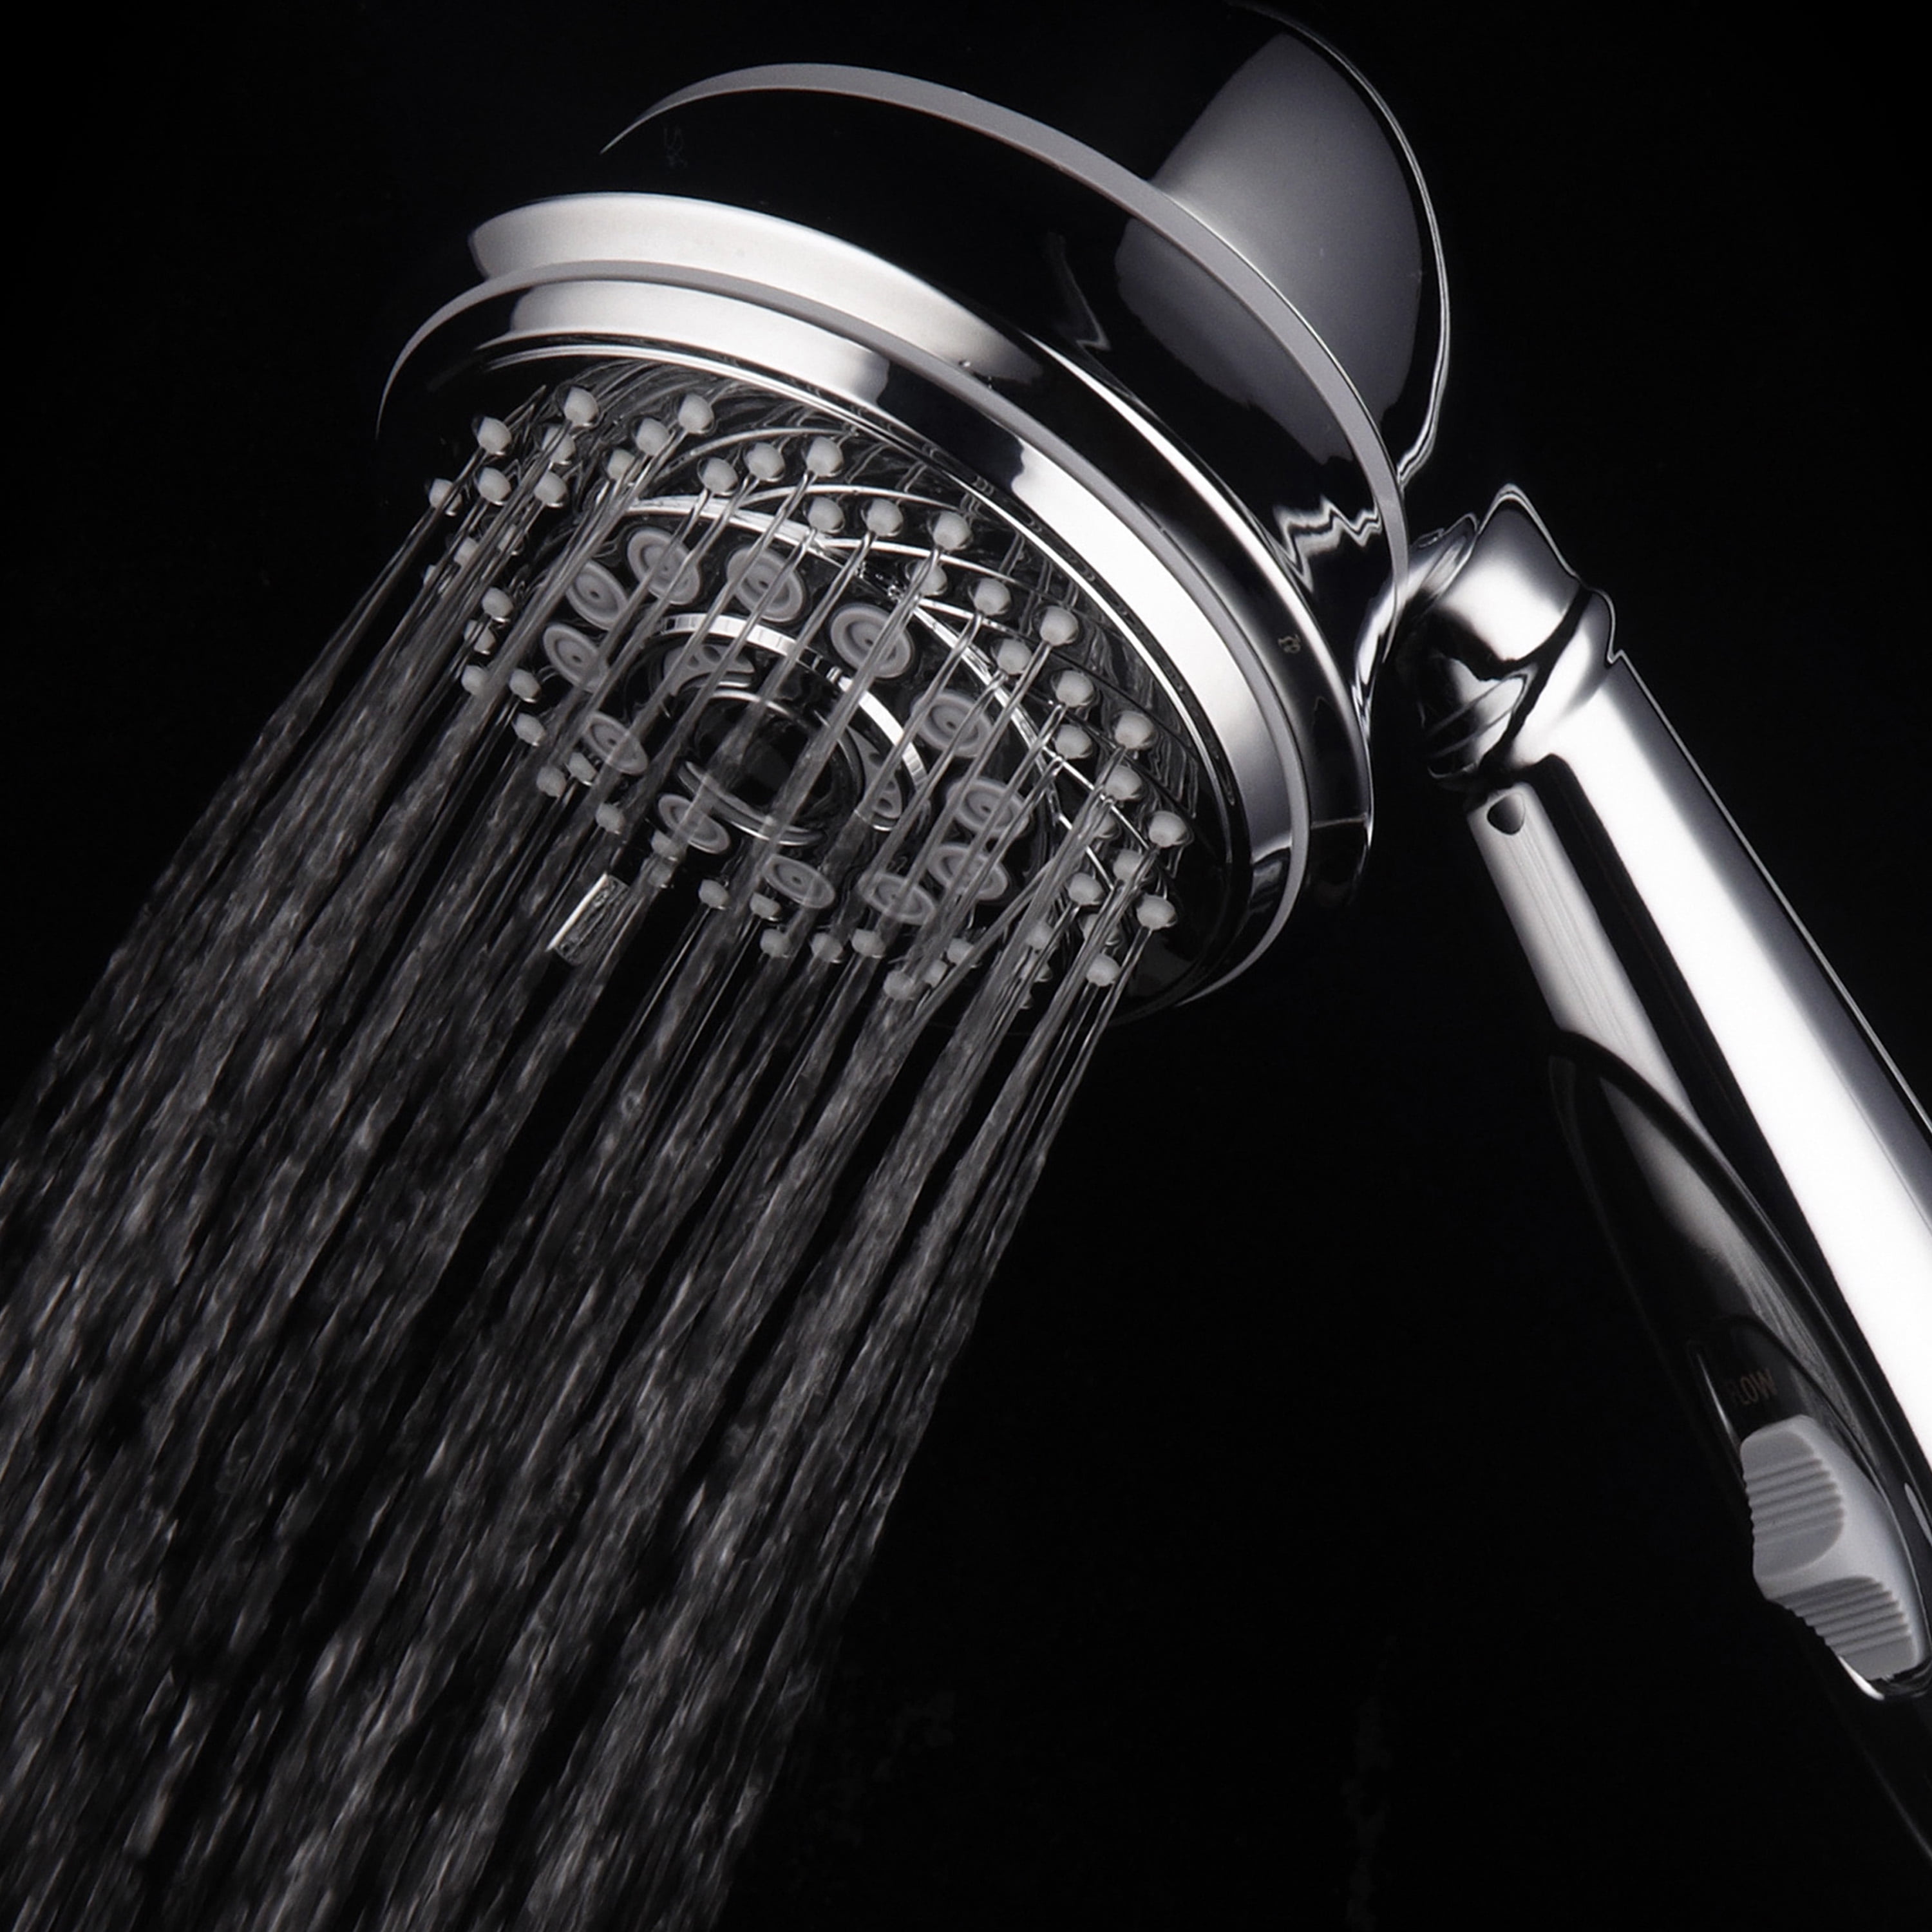 HotelSpa AquaCare 7-Setting, 3-Stage Filtered Handheld Shower Head